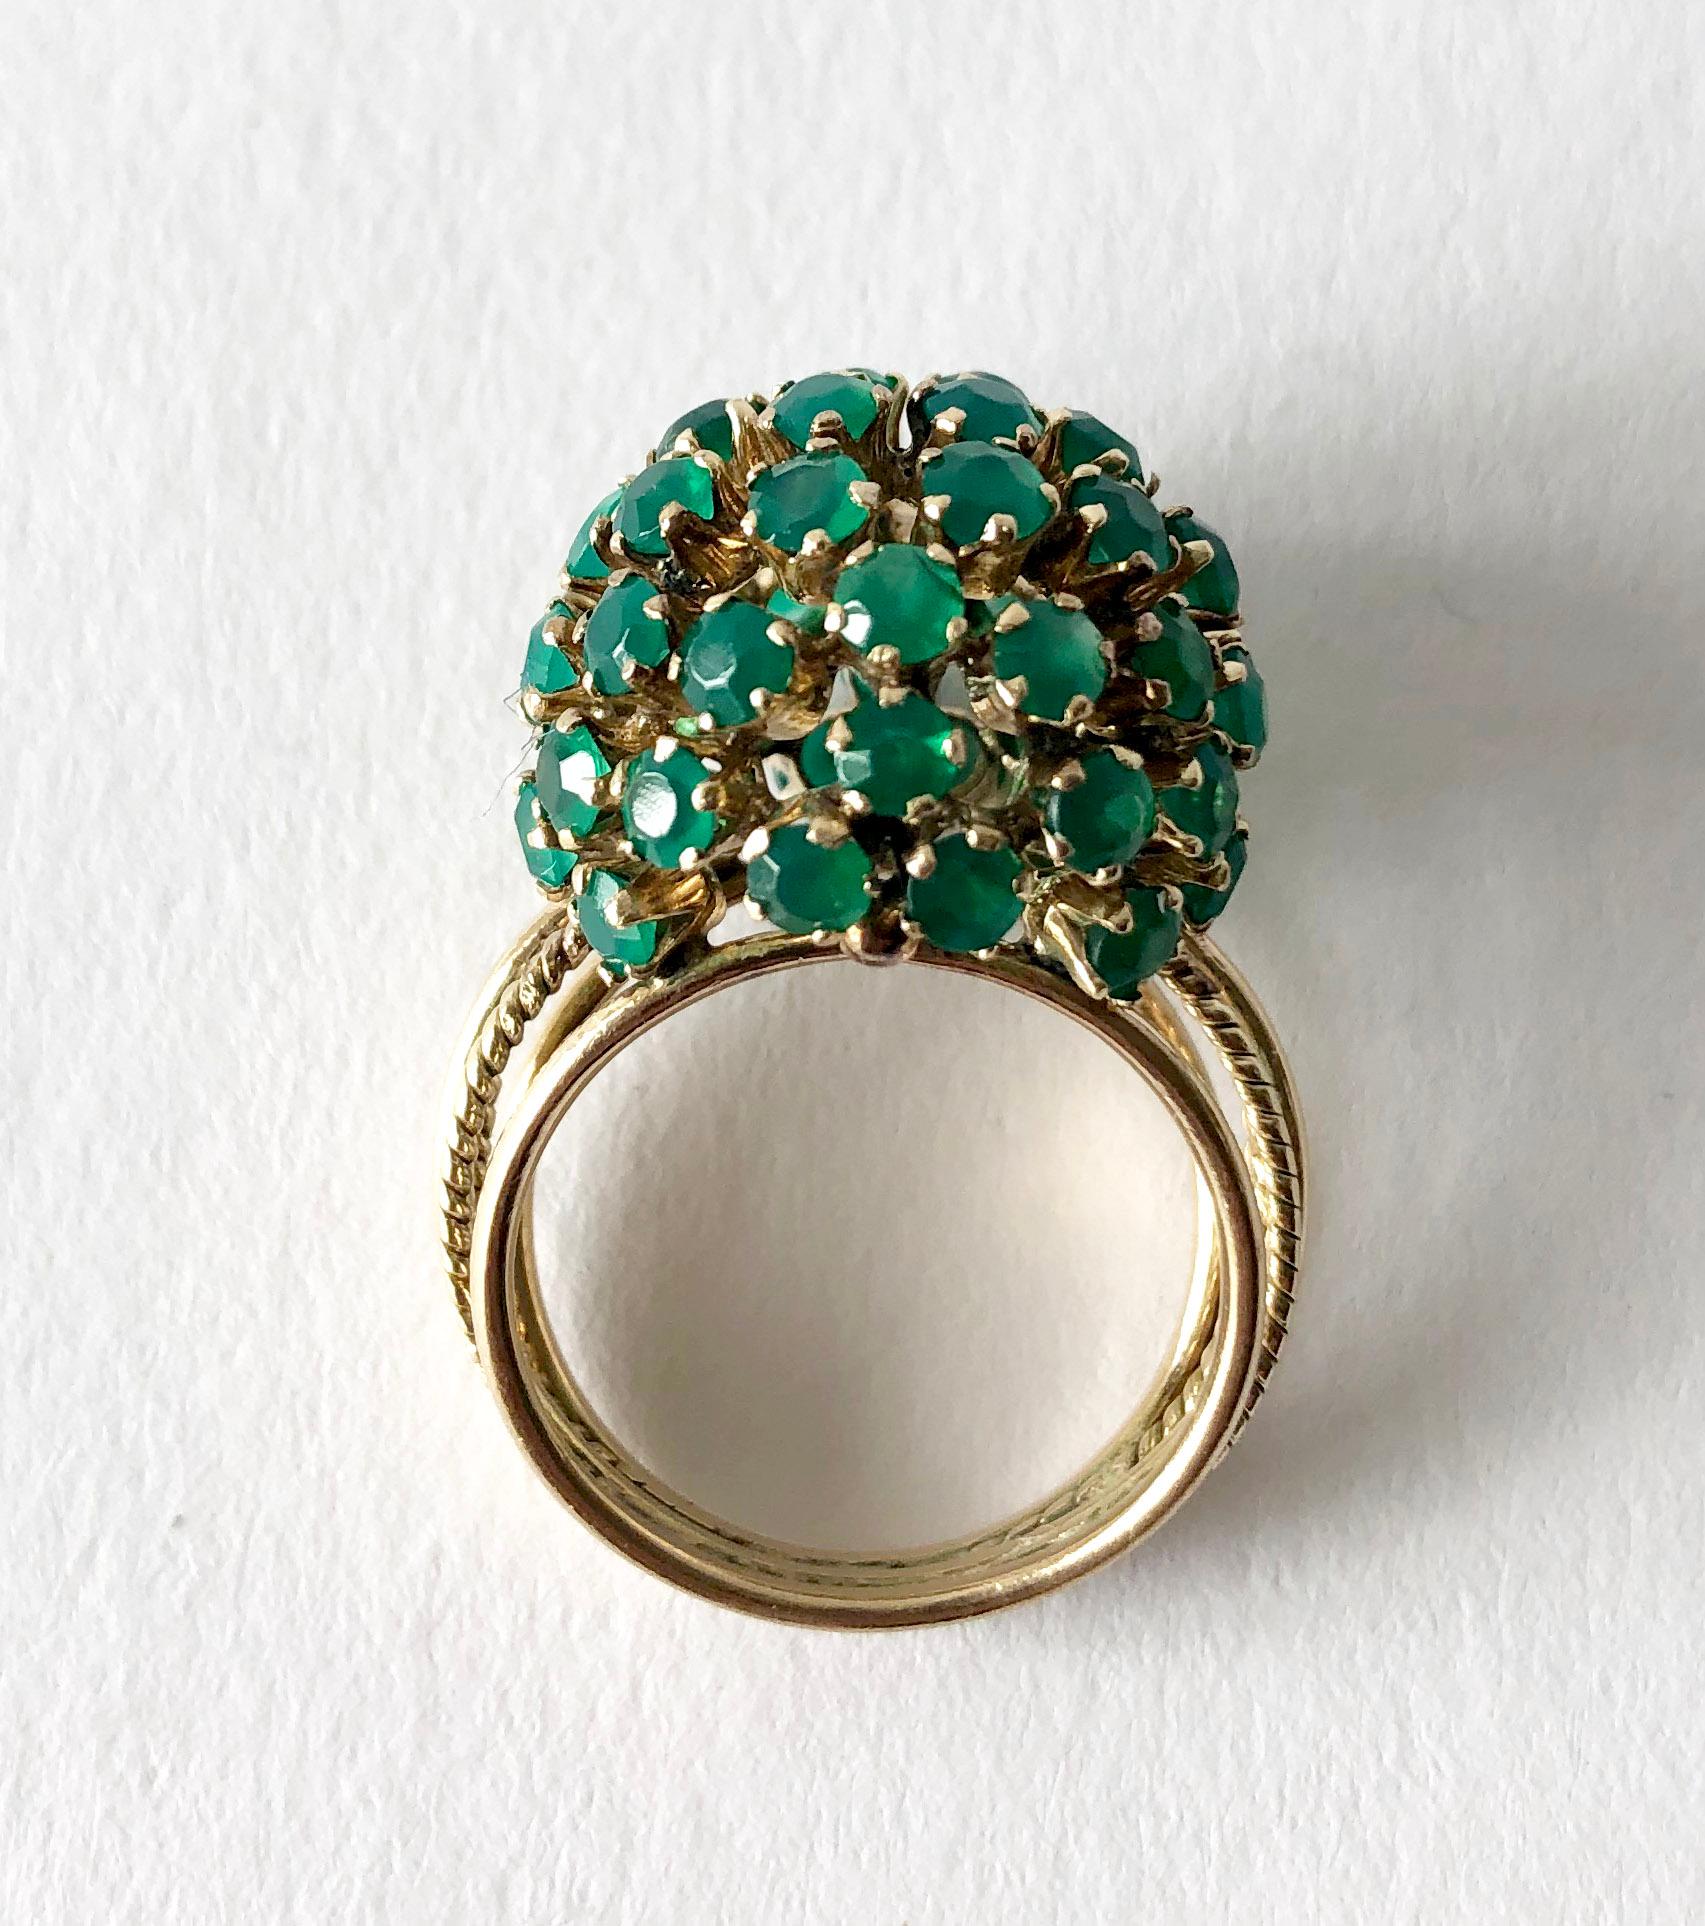 14k gold and emerald ball ring, circa 1960s.  Ring is a finger size 6, ball measures 5/8